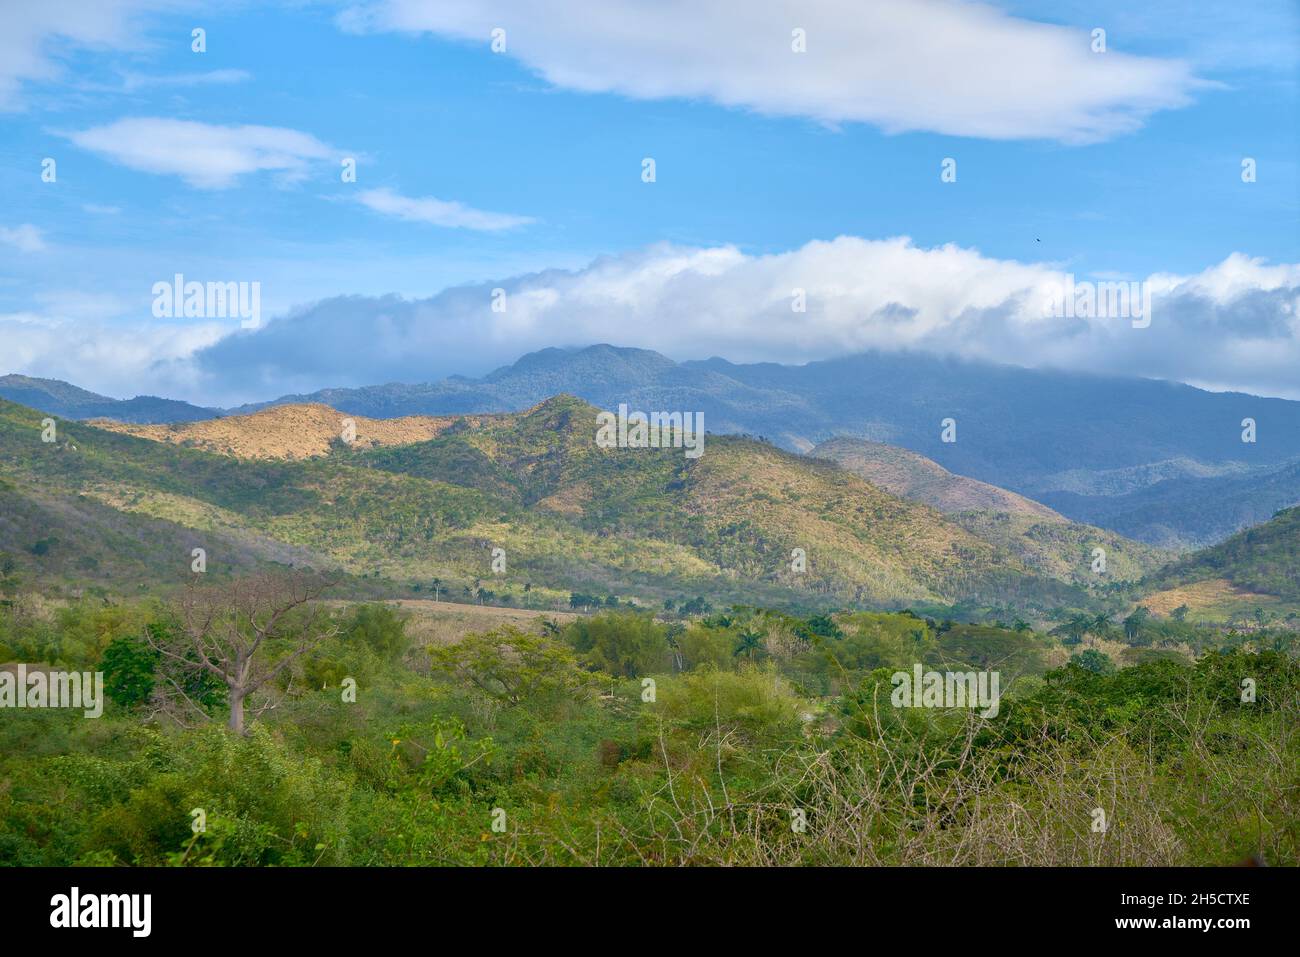 Landscape at the Valley des los Ingenios with formerly densely forested and nowadays deforested hills, Cuba, Valley de los Ingenios Stock Photo